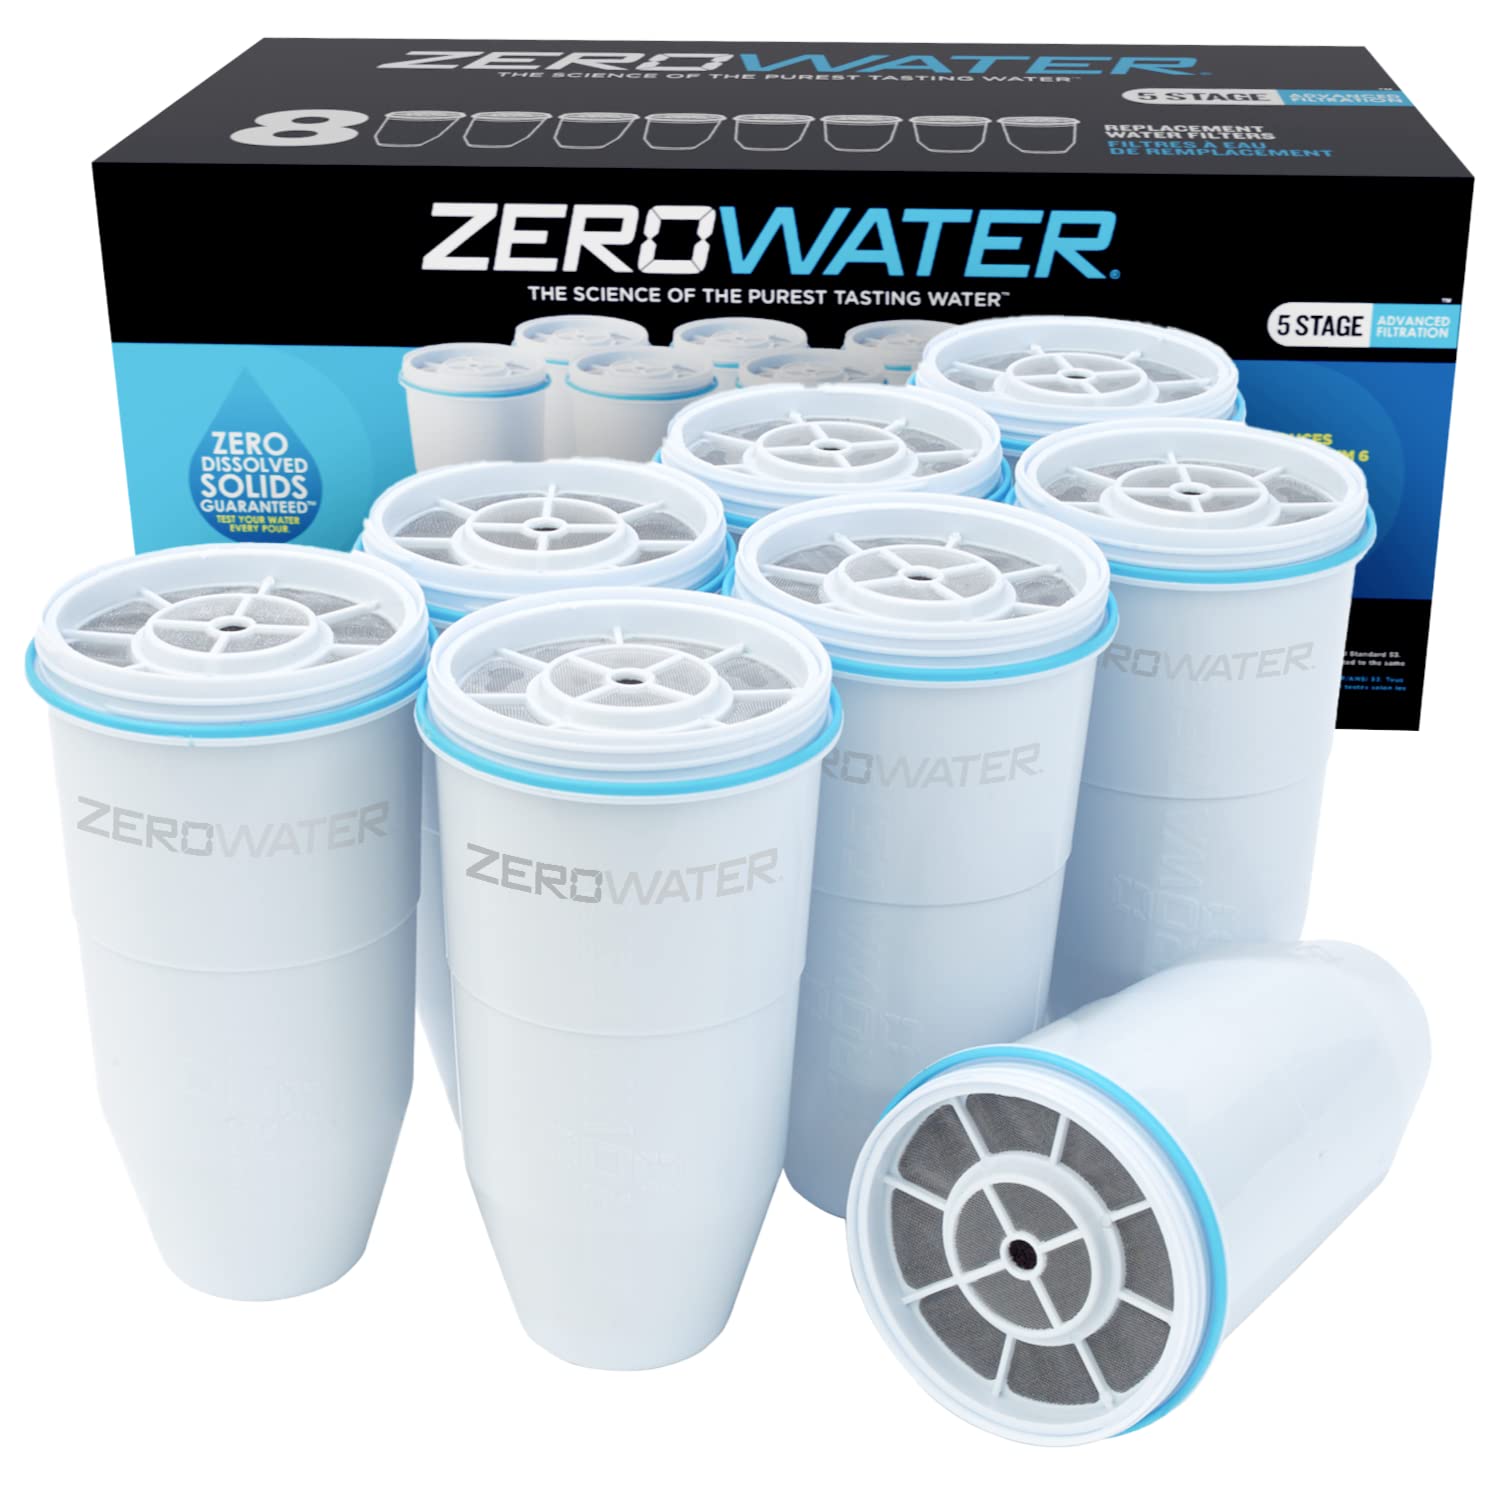 ZeroWater Official Replacement Filter - 5-Stage Filter Replacement 0 TDS for Improved Tap Water Taste - NSF Certified to Reduce Lead, Chromium, and PFOA/PFOS, 8-Pack